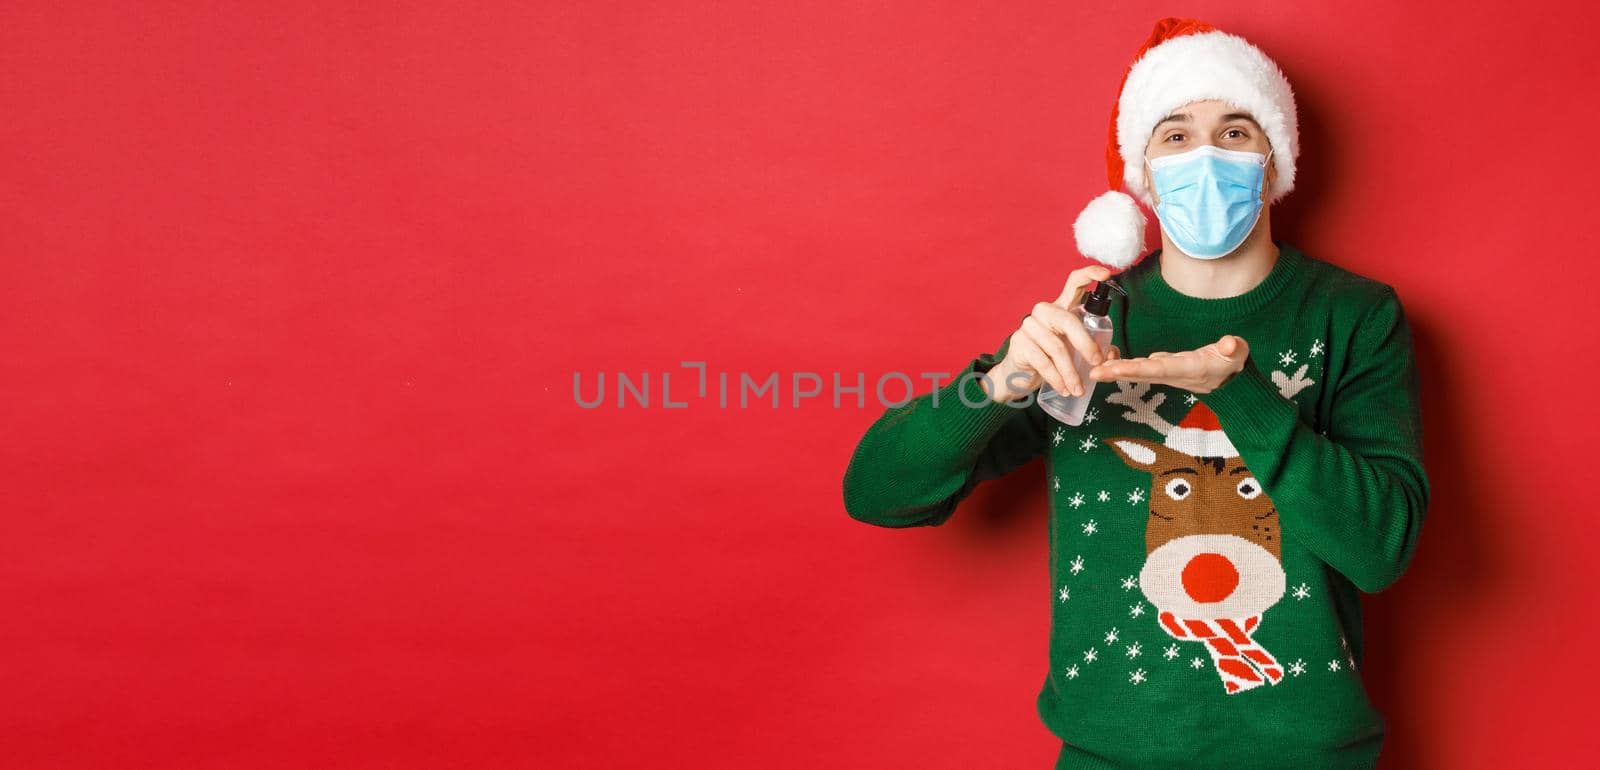 Concept of new year, coronavirus and social distancing. Attractive young man in santa hat, medical mask and christmas sweater, using hand sanitizer to clean hands, standing over red background.